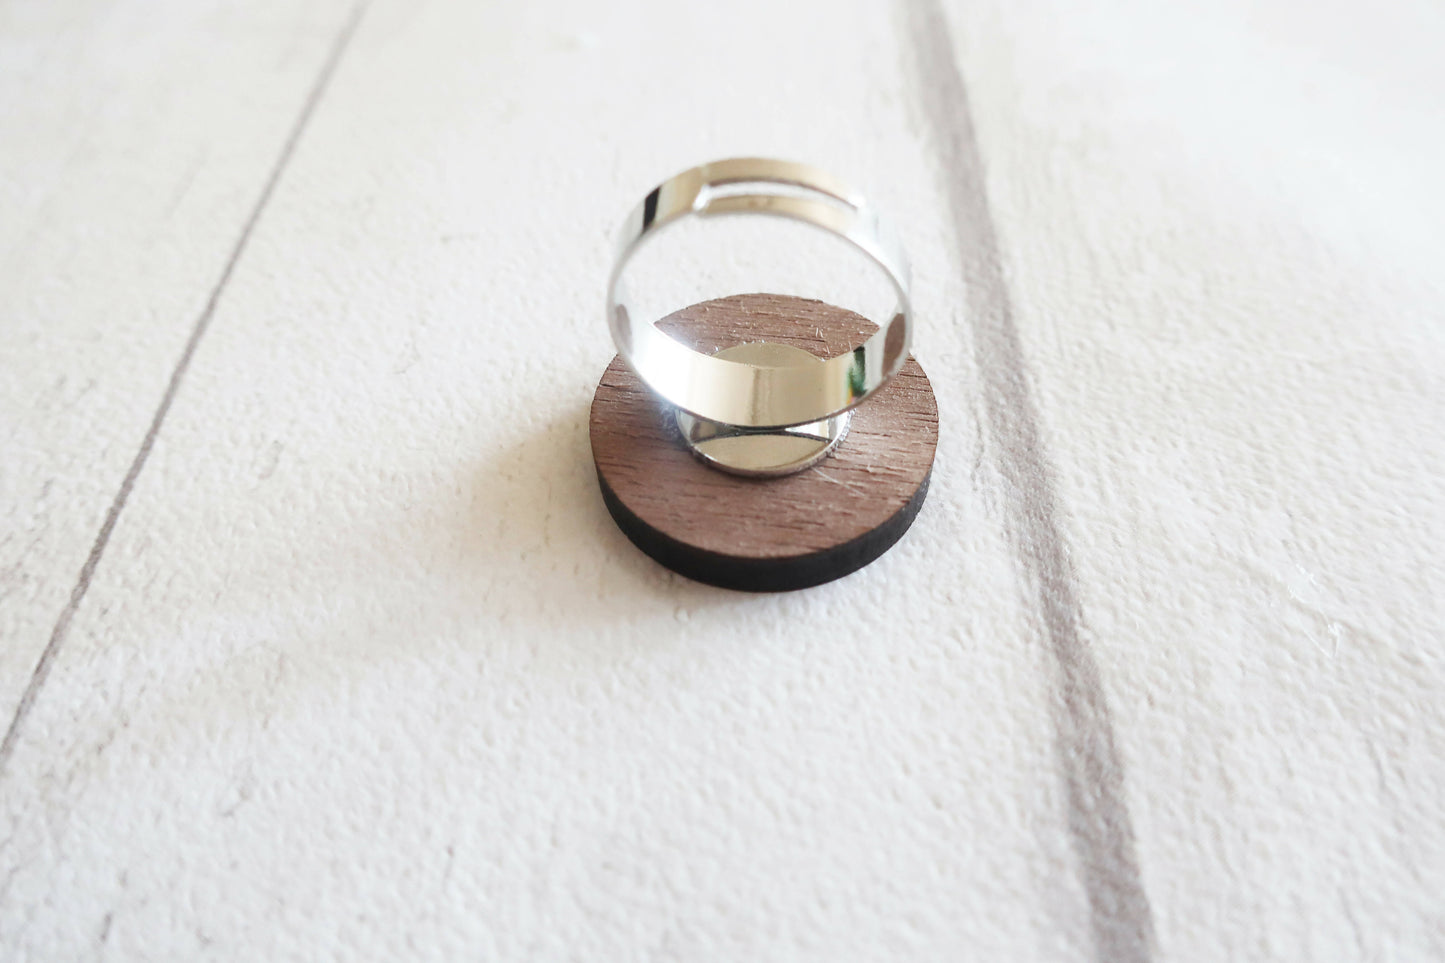 Yellow and black pattern wooden ring, adjustable